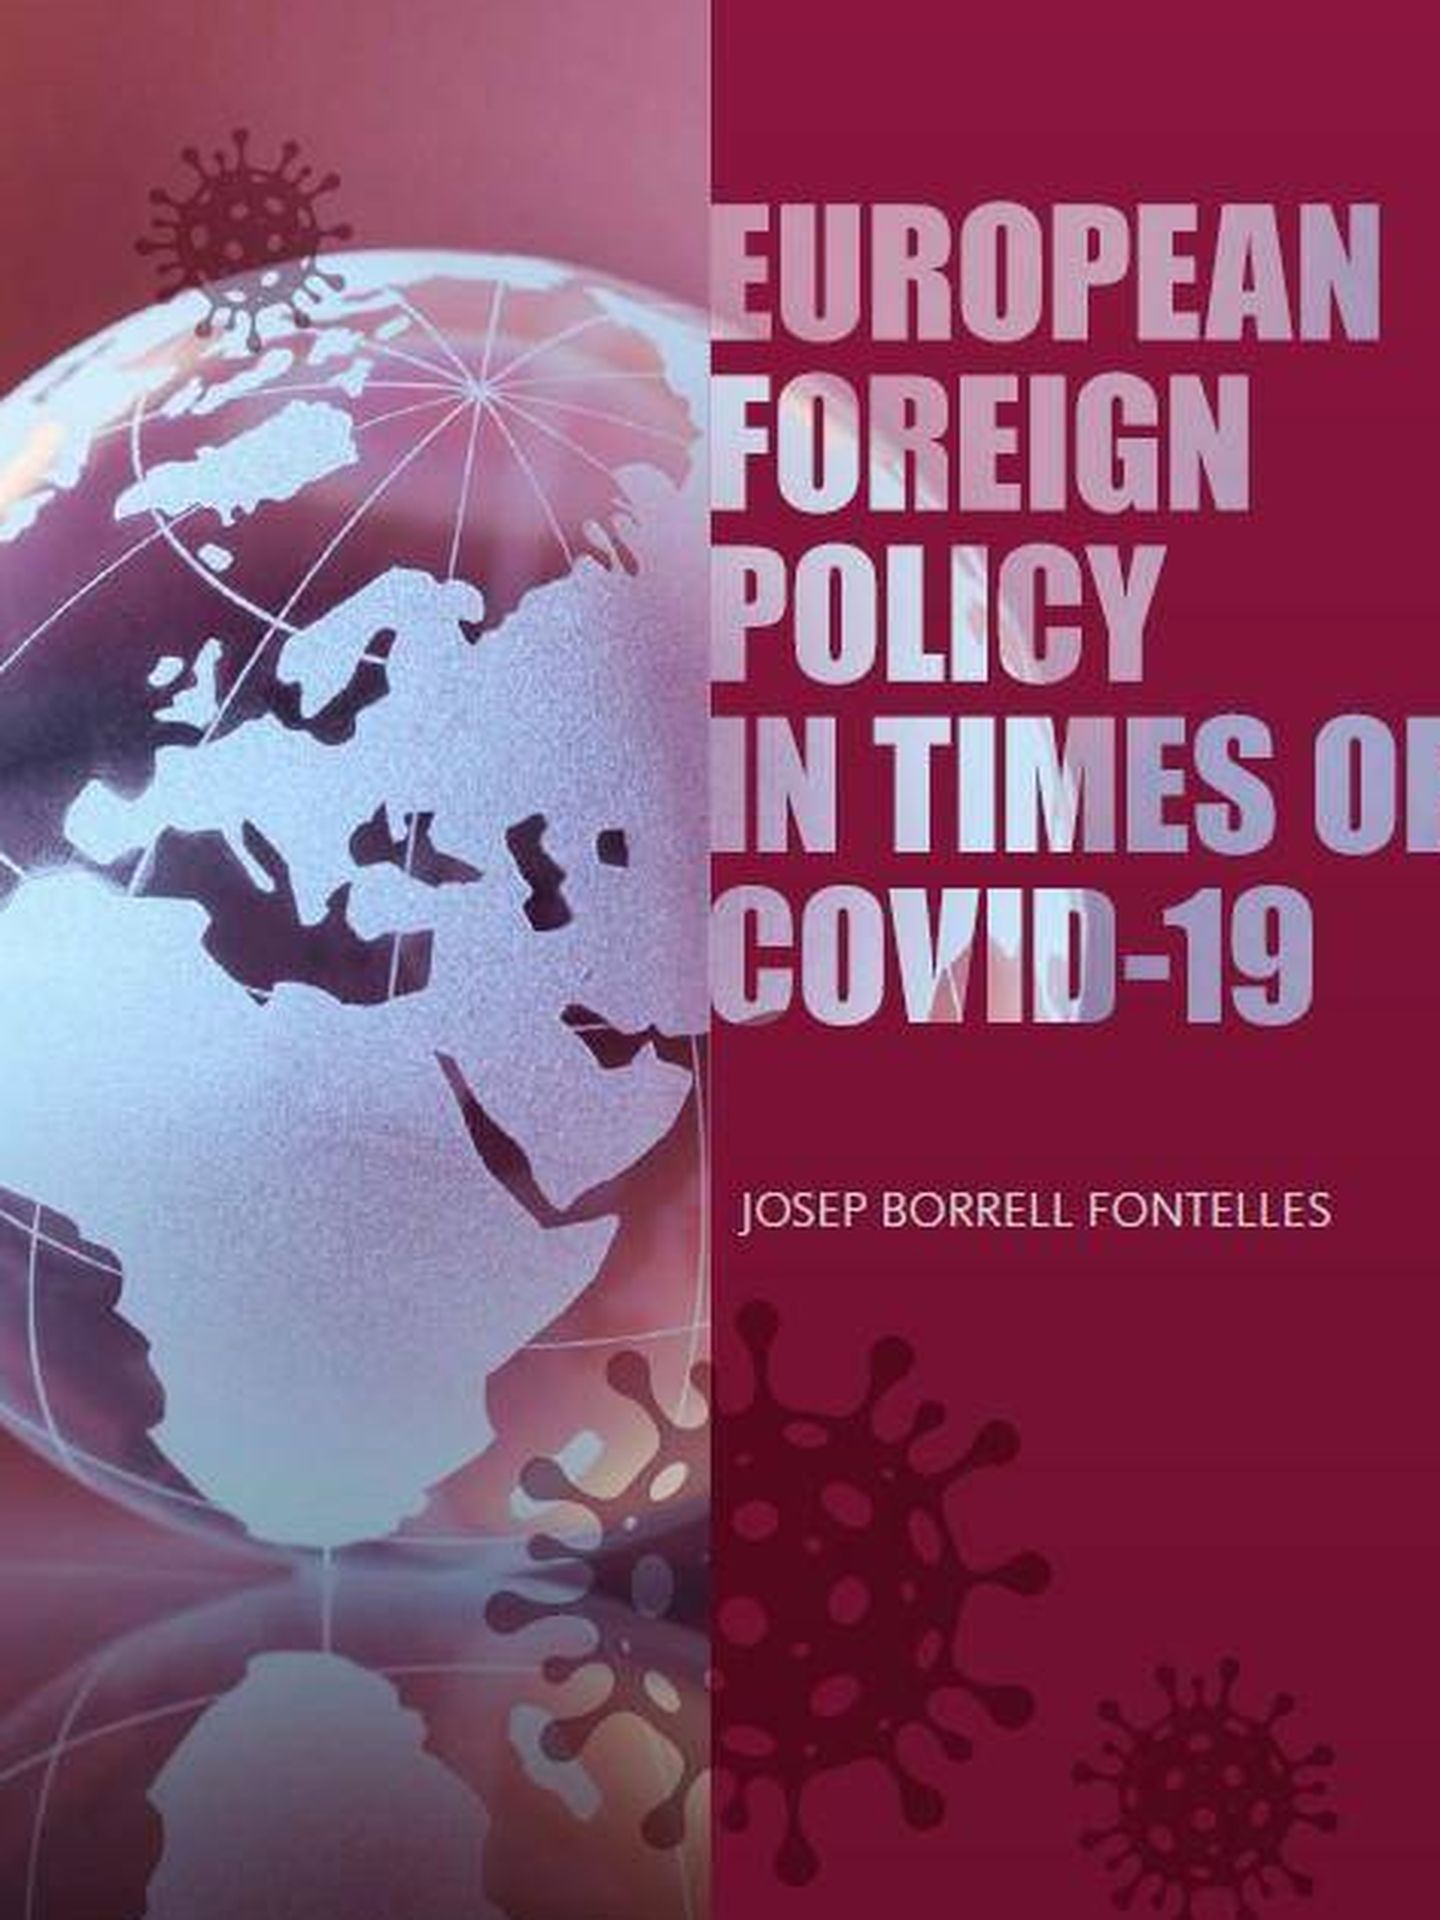 'European foreign policy in times of Covid-19'